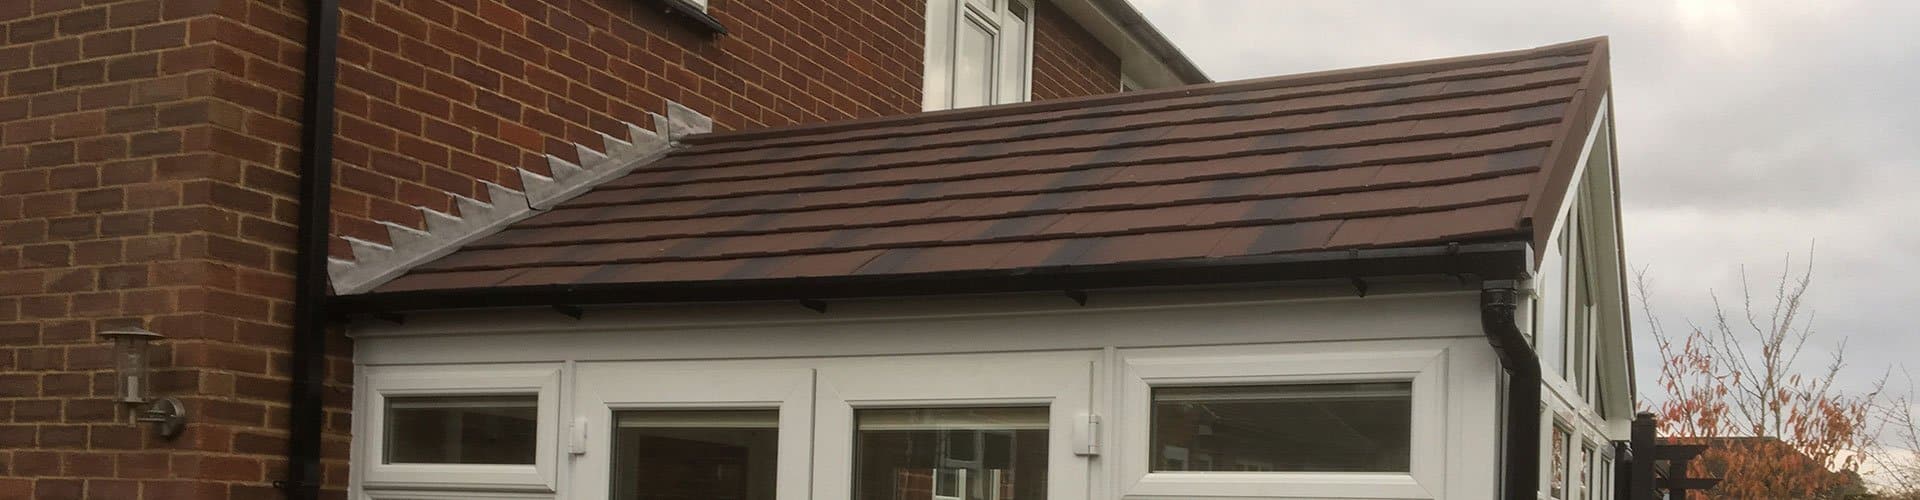 Replacement Conservatory Roof companies in Basingstoke